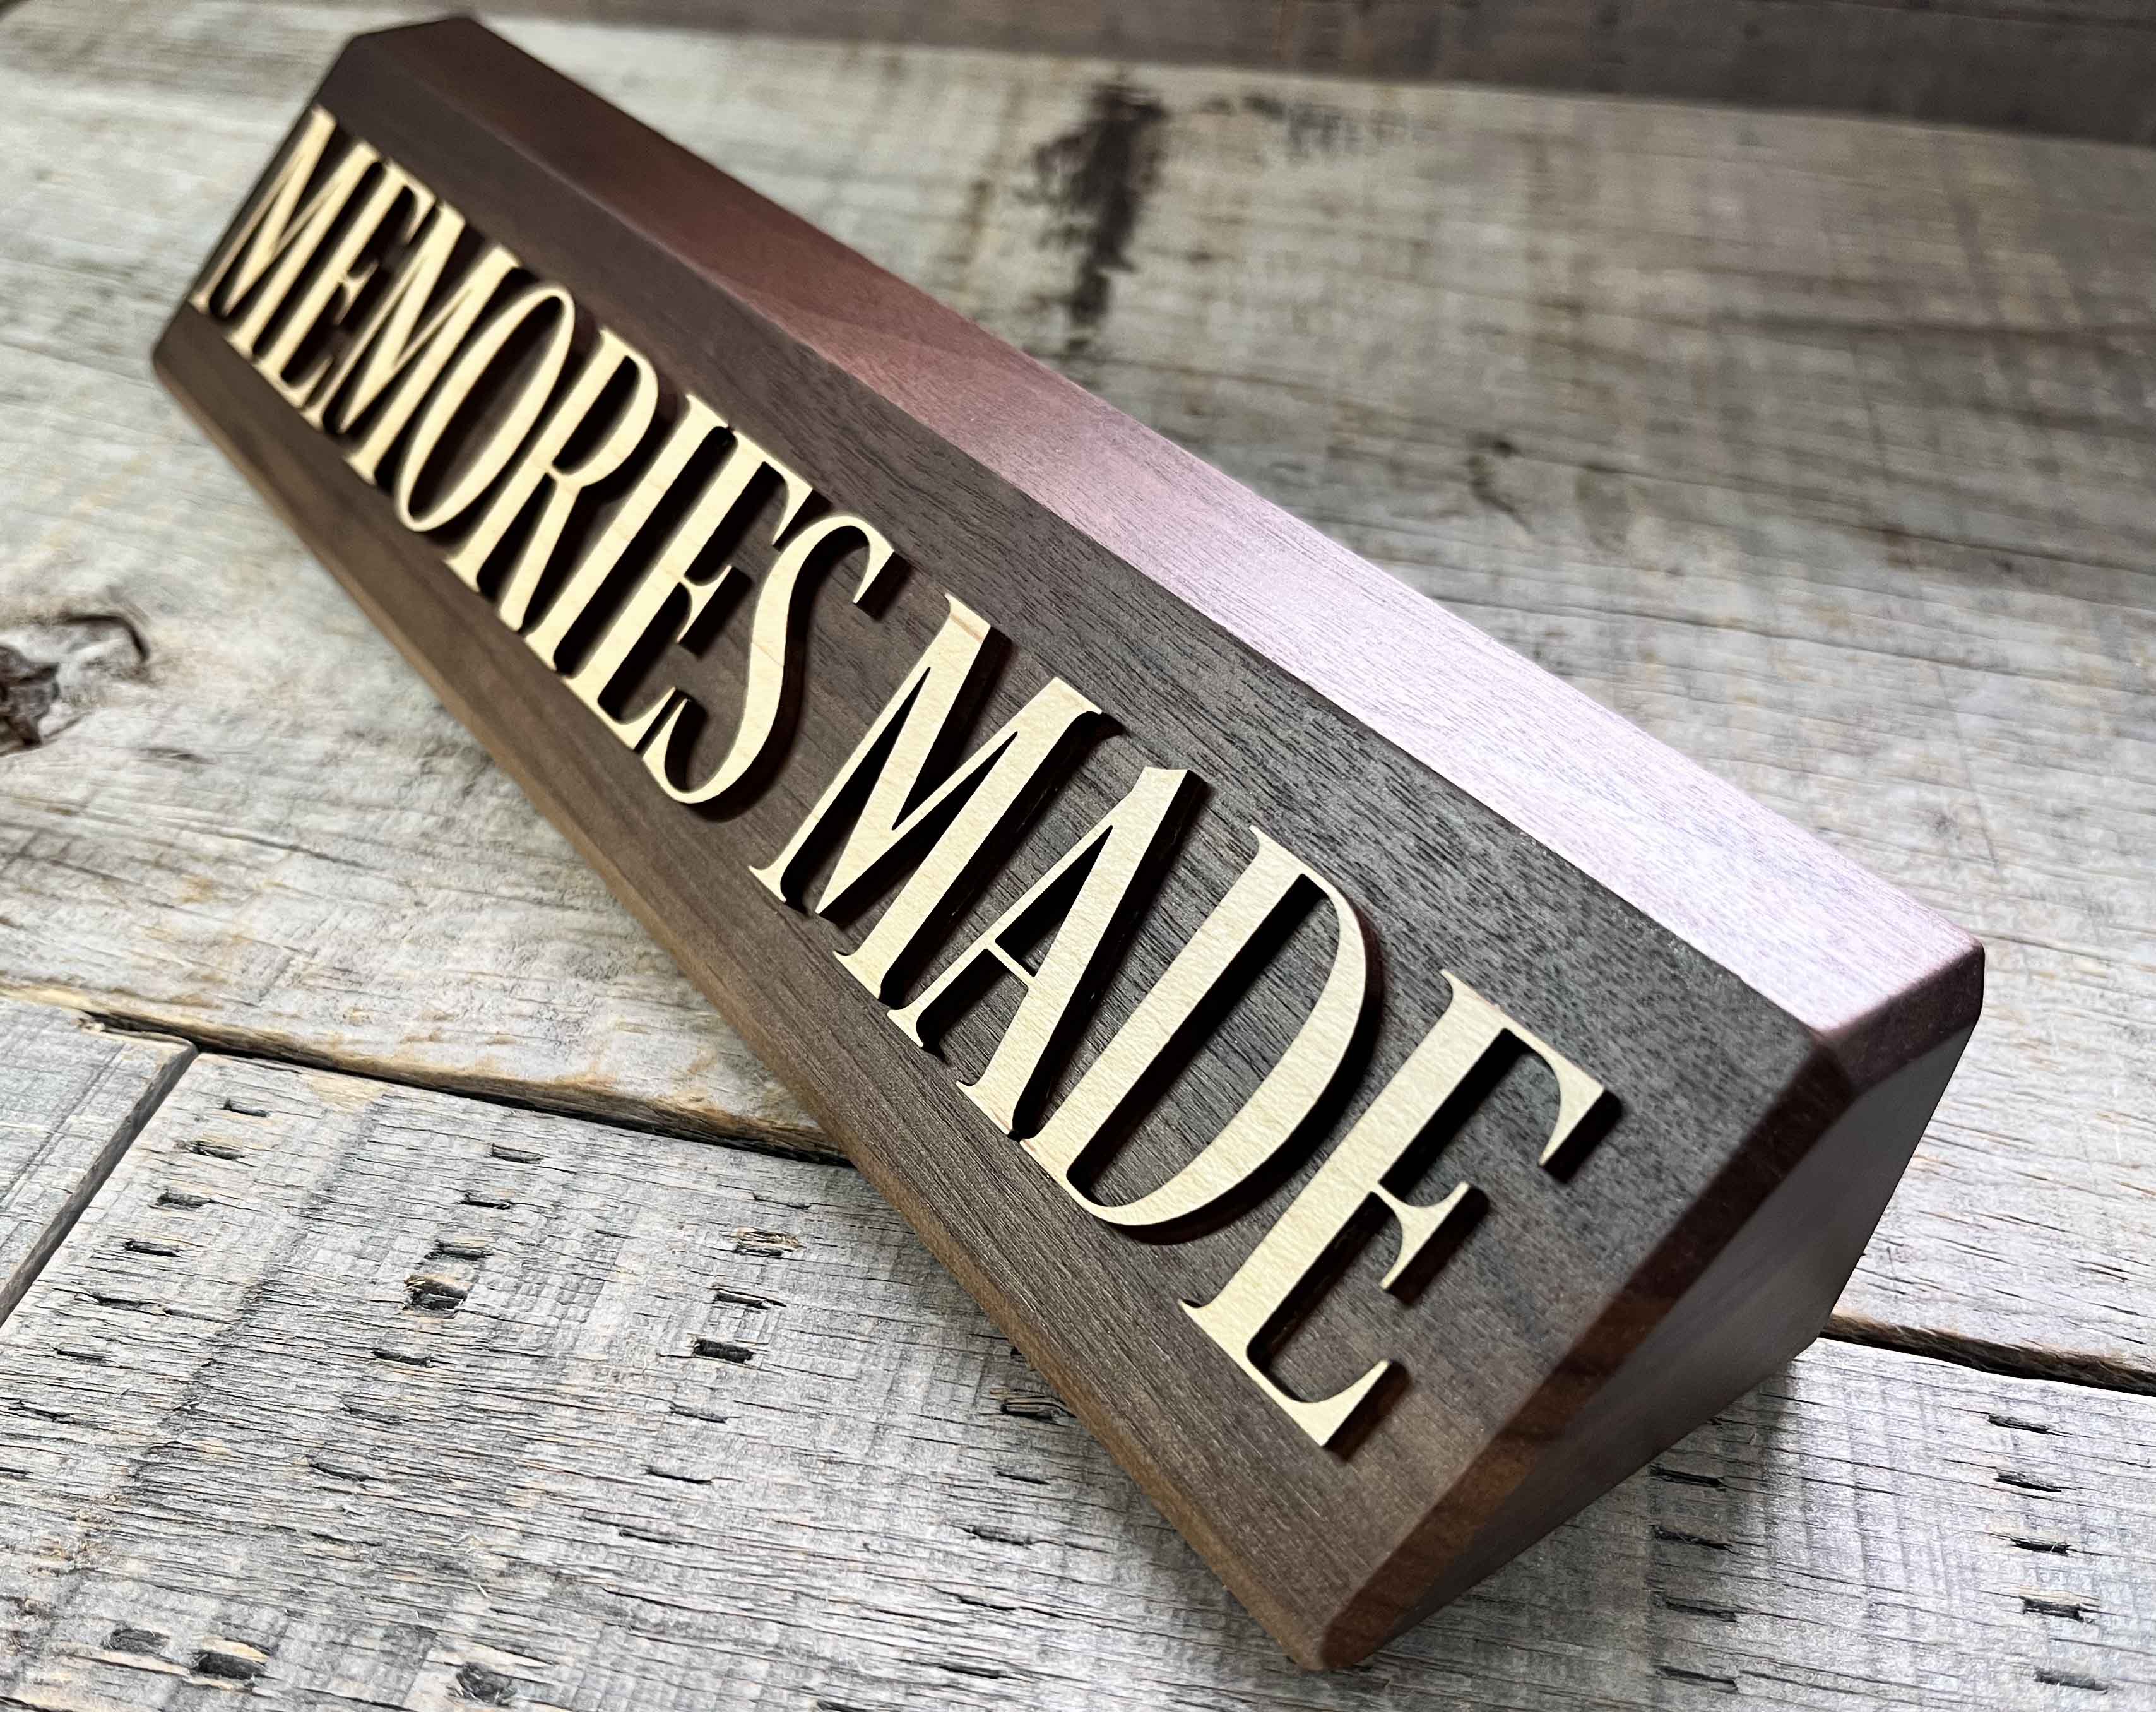 3D Maple and Walnut Desk Name Plate.